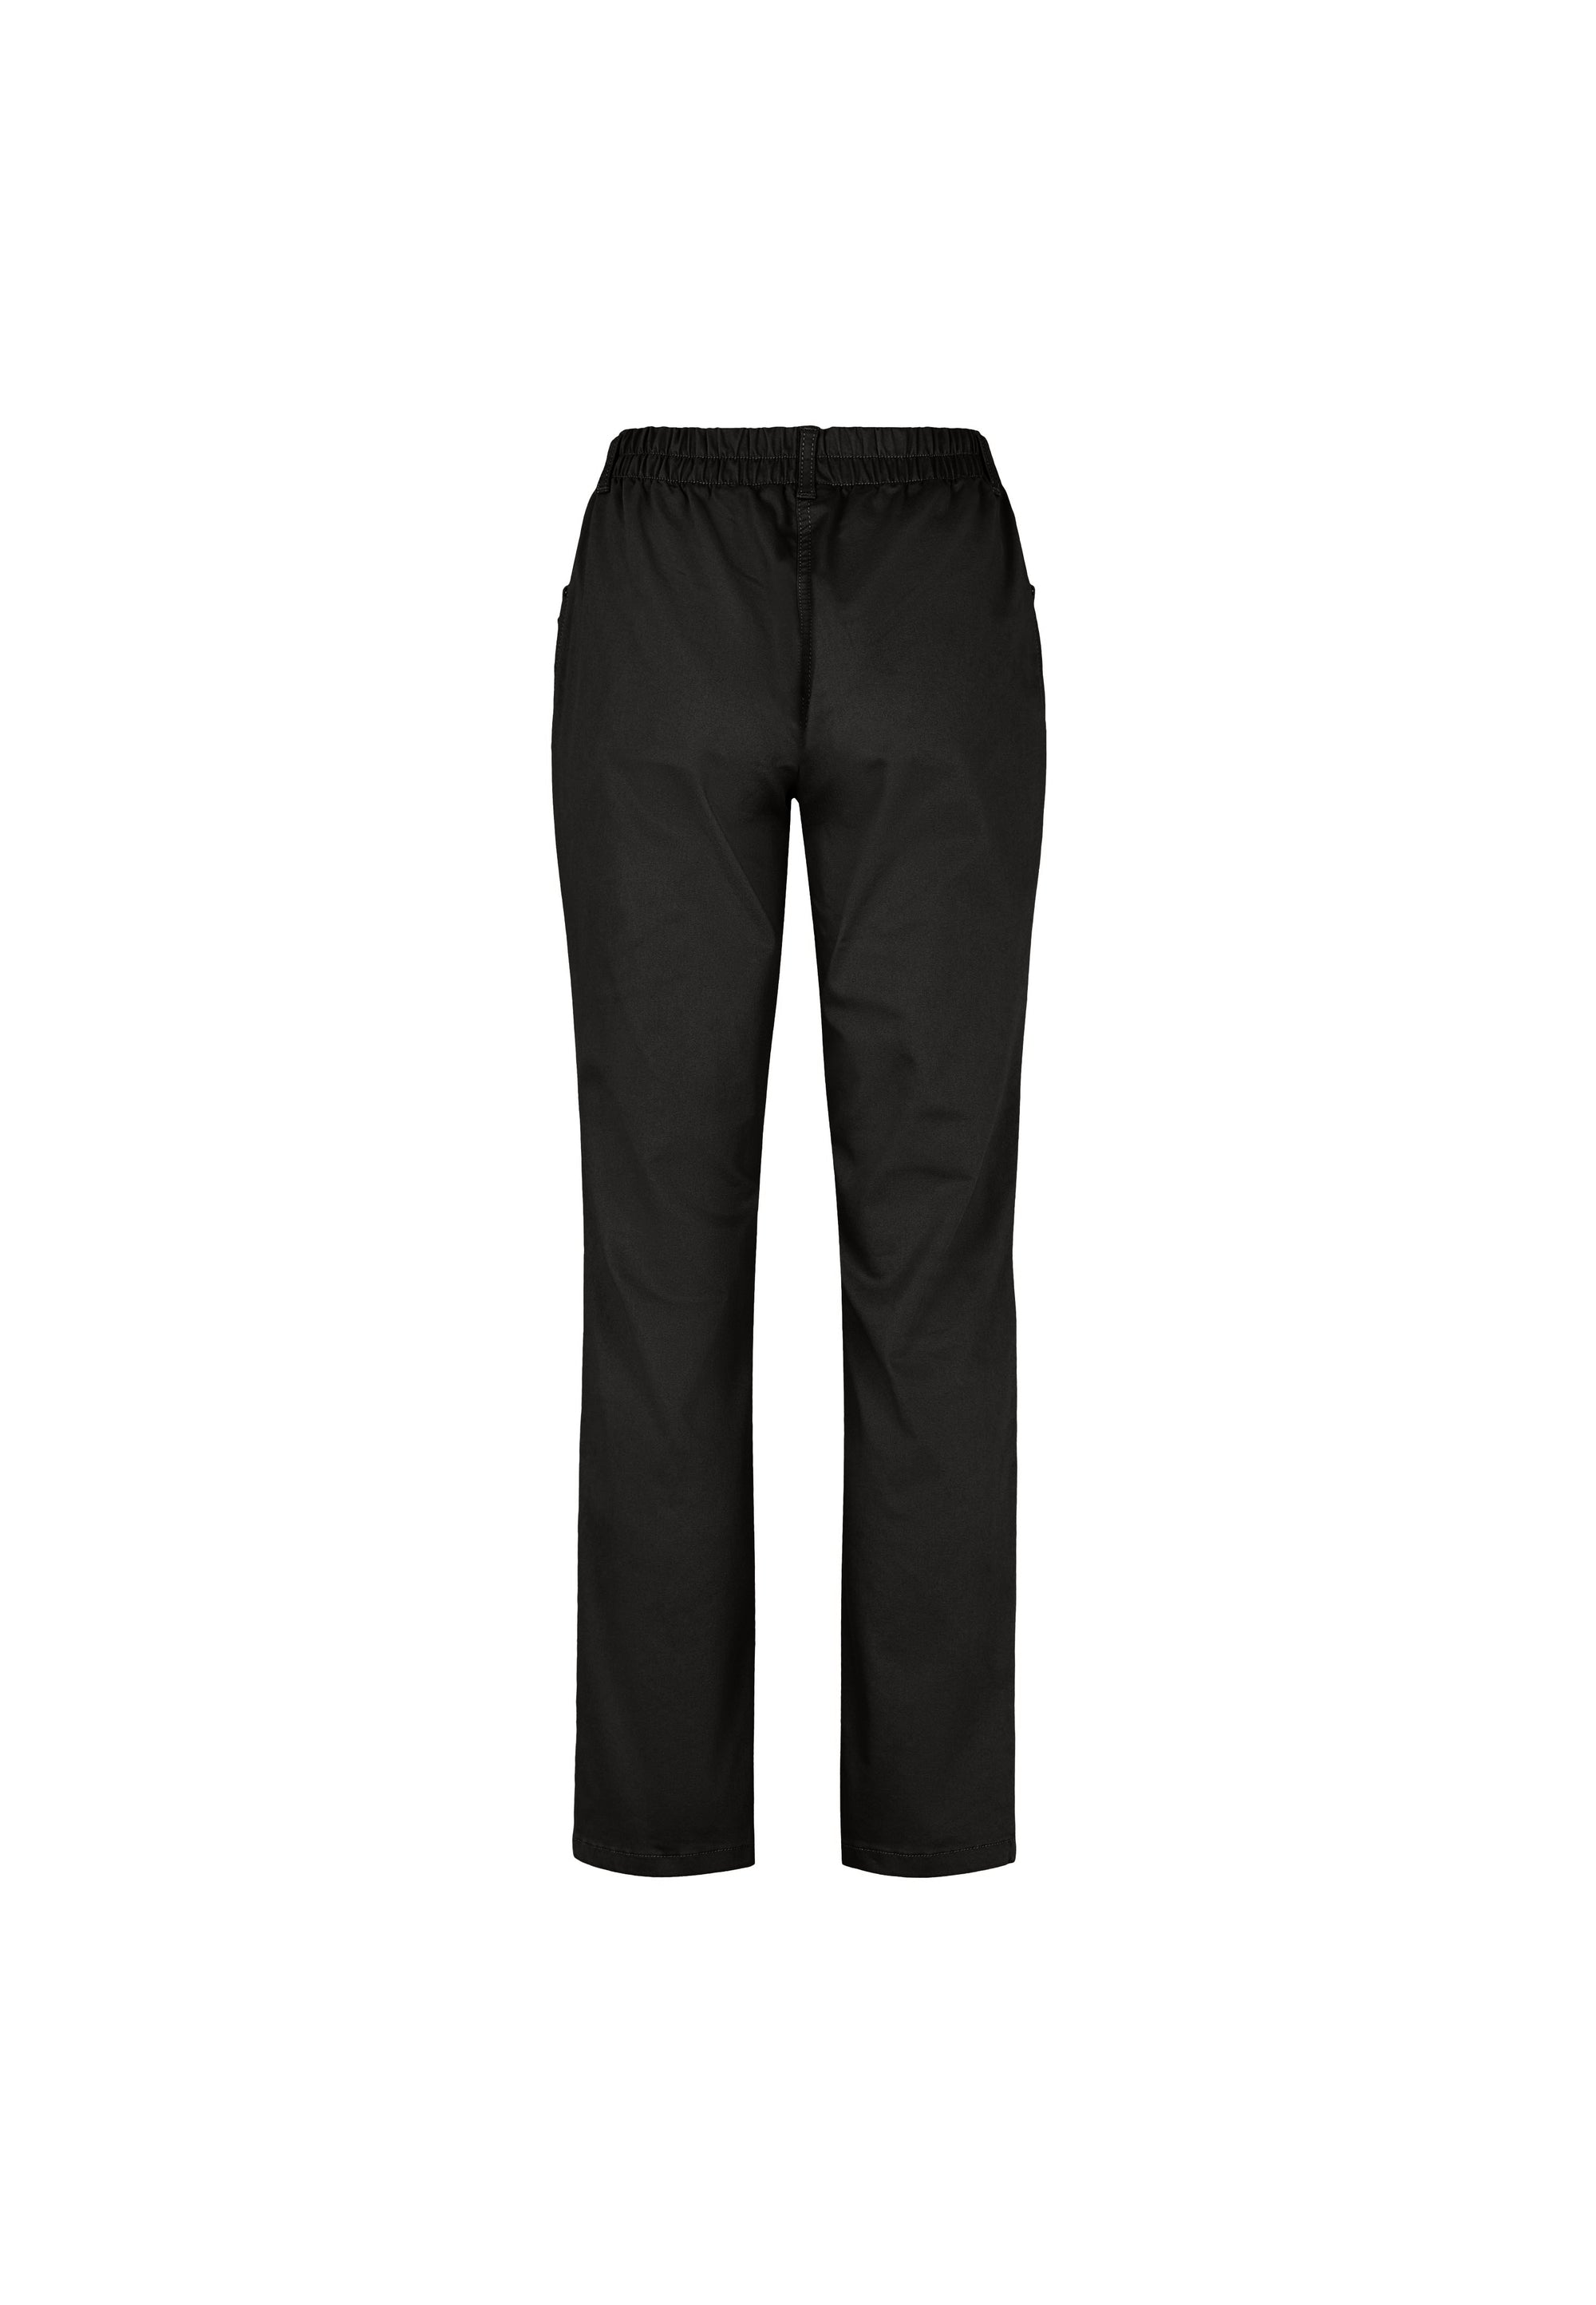 LAURIE  Violet Relaxed - Medium Length Trousers RELAXED 99100 Black